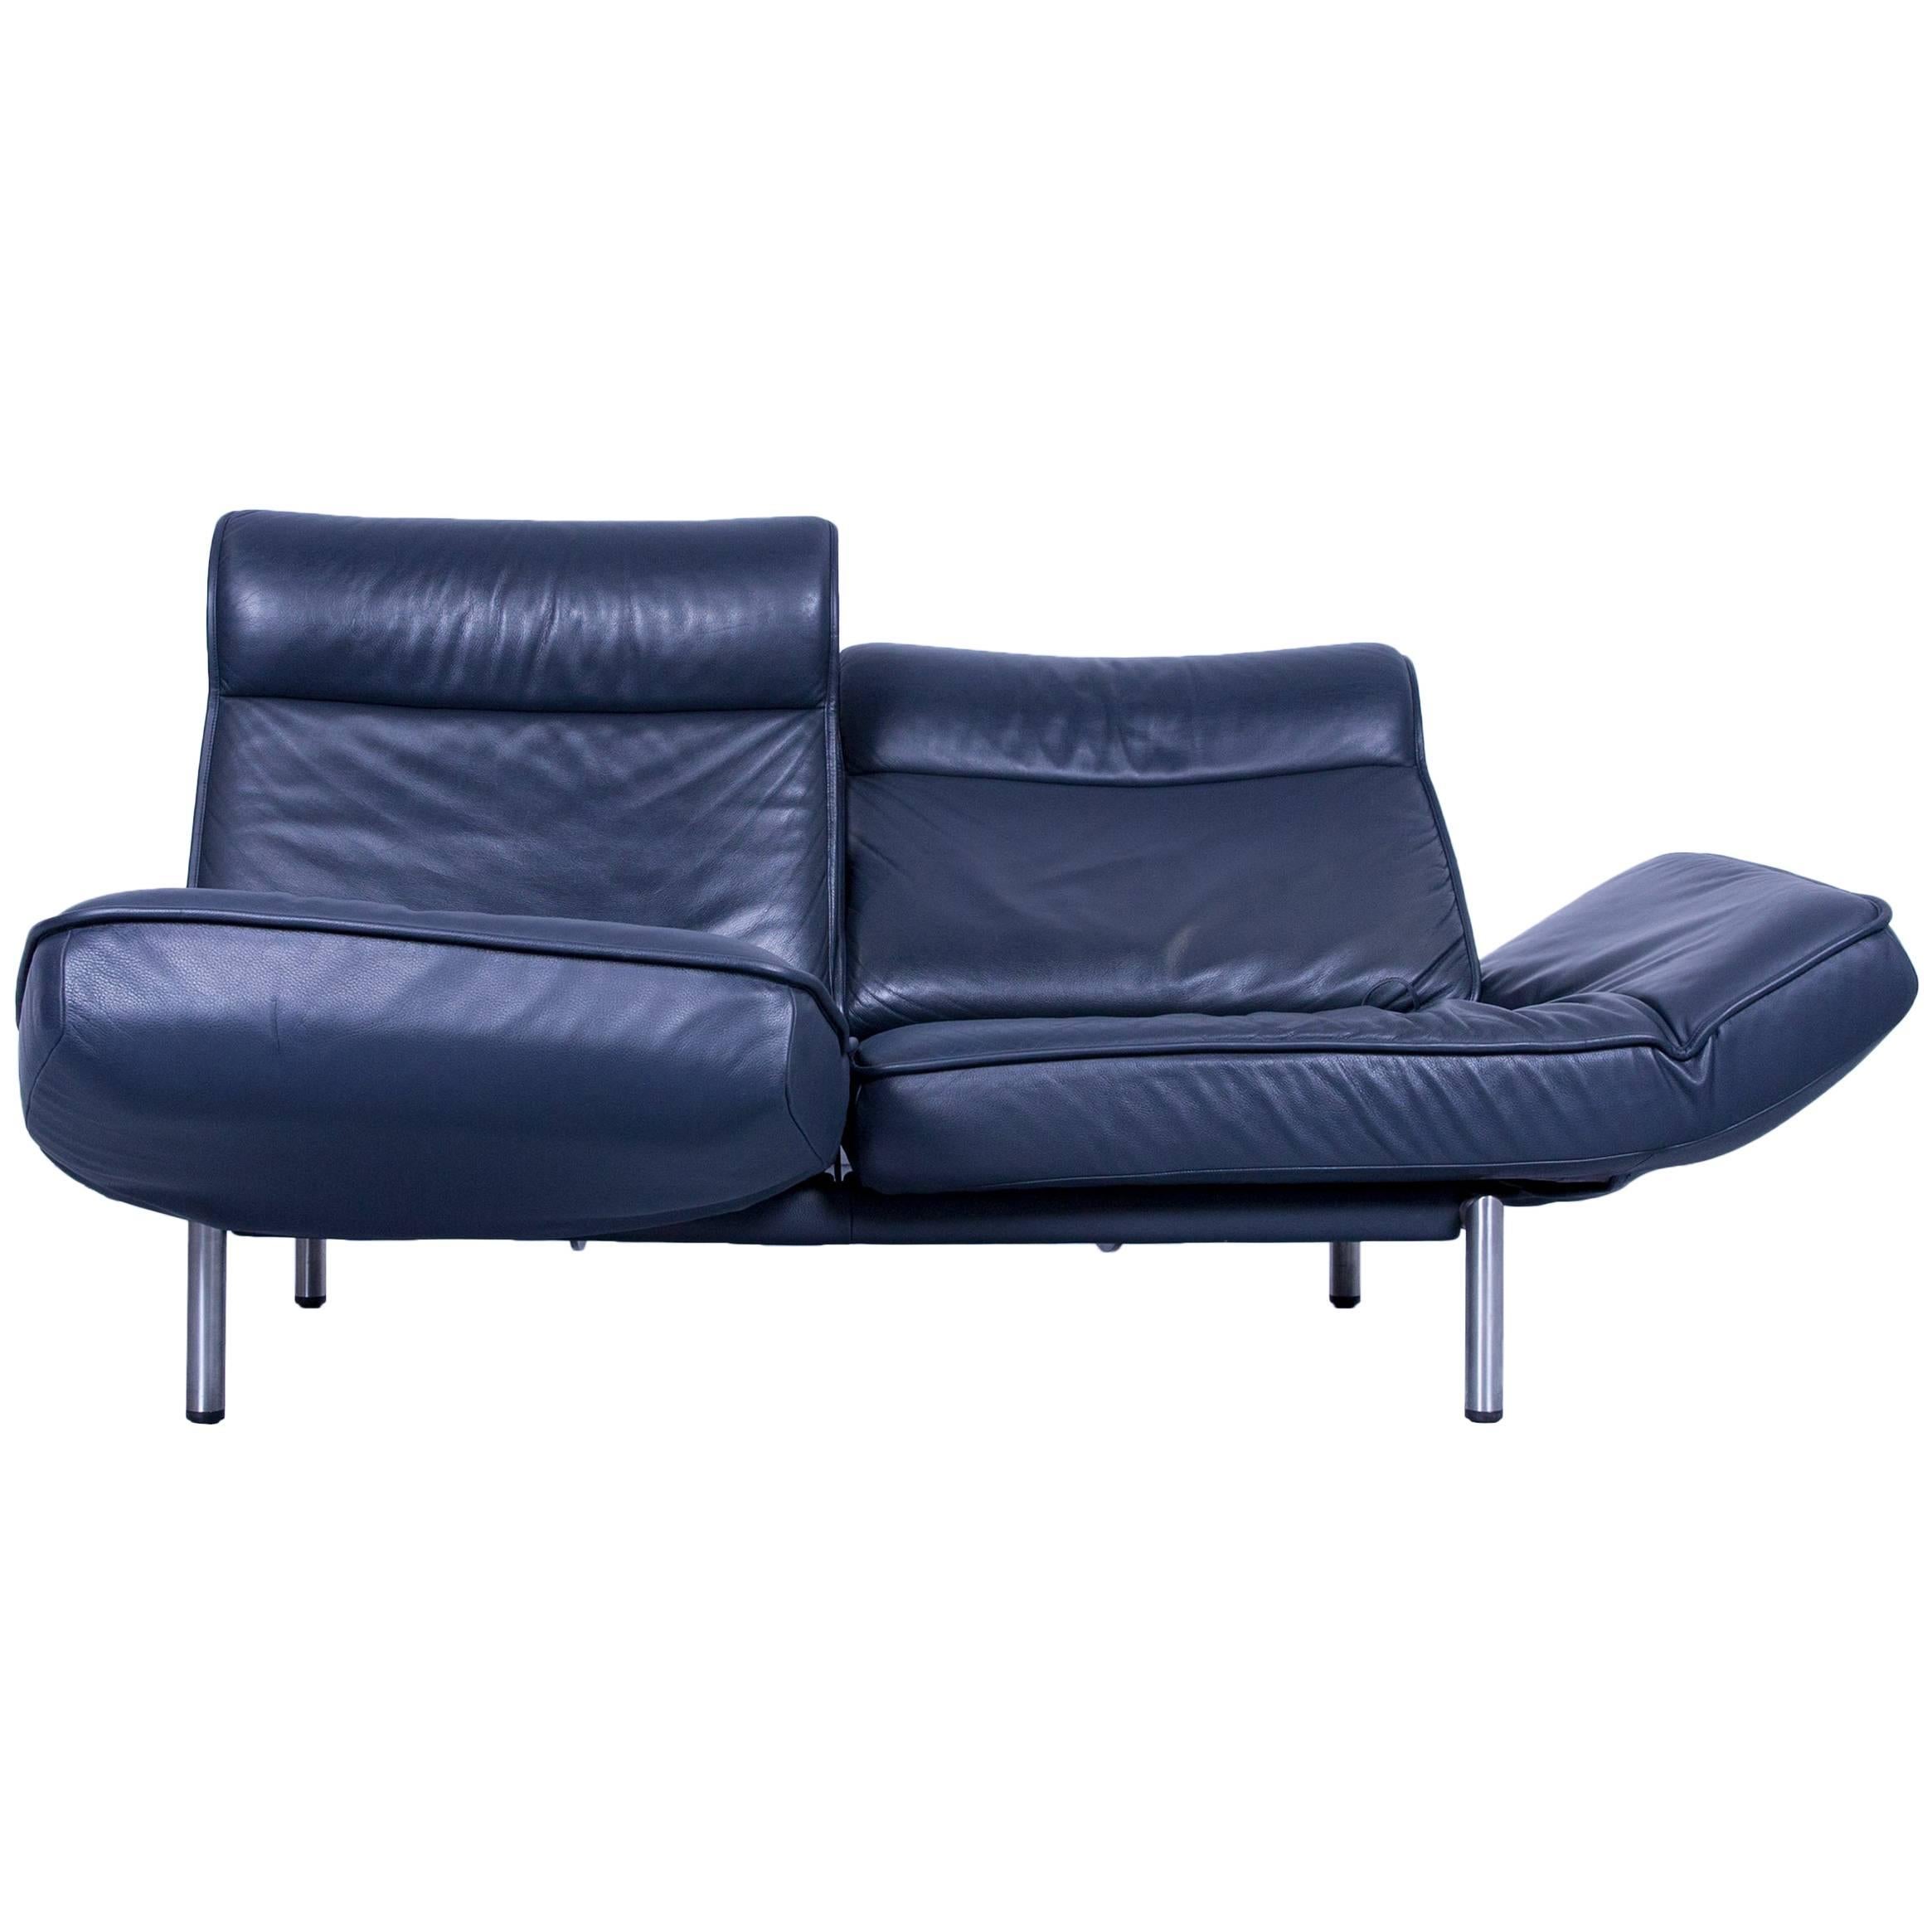 De Sede Ds 450 Designer Leather Sofa Night Blue Relax Function Two-Seat Modern